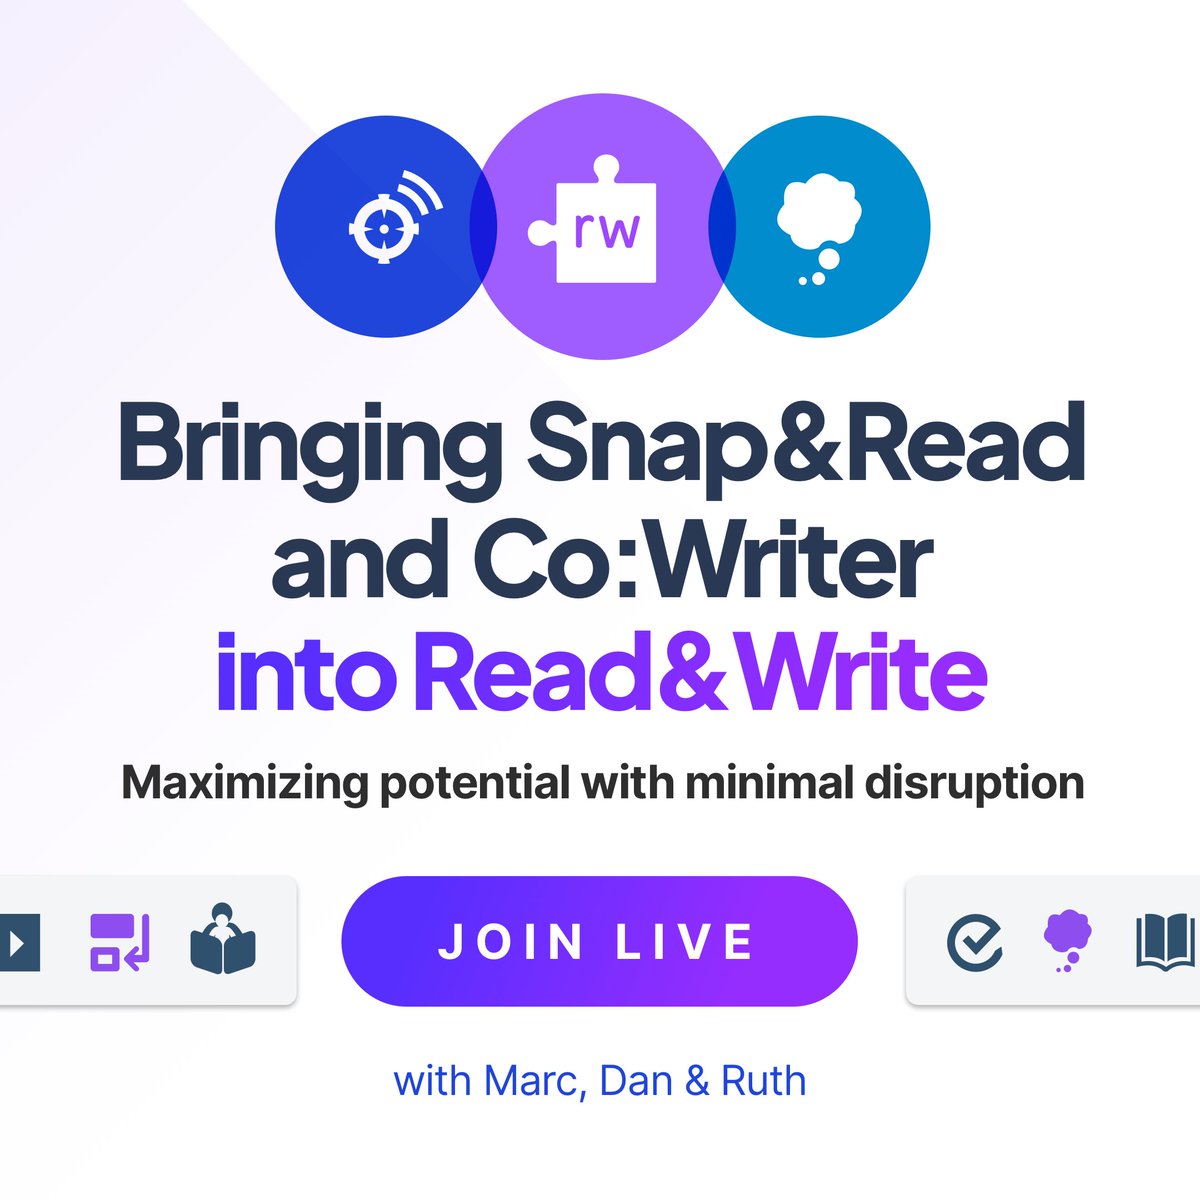 Co:Writer and Snap&Read customers - join us tomorrow (May 9th) for a special webinar where Marc, Dan and Ruth will cover the future direction and transition plan for these tools. It's one not to be missed! Register now text.help/fCfppT